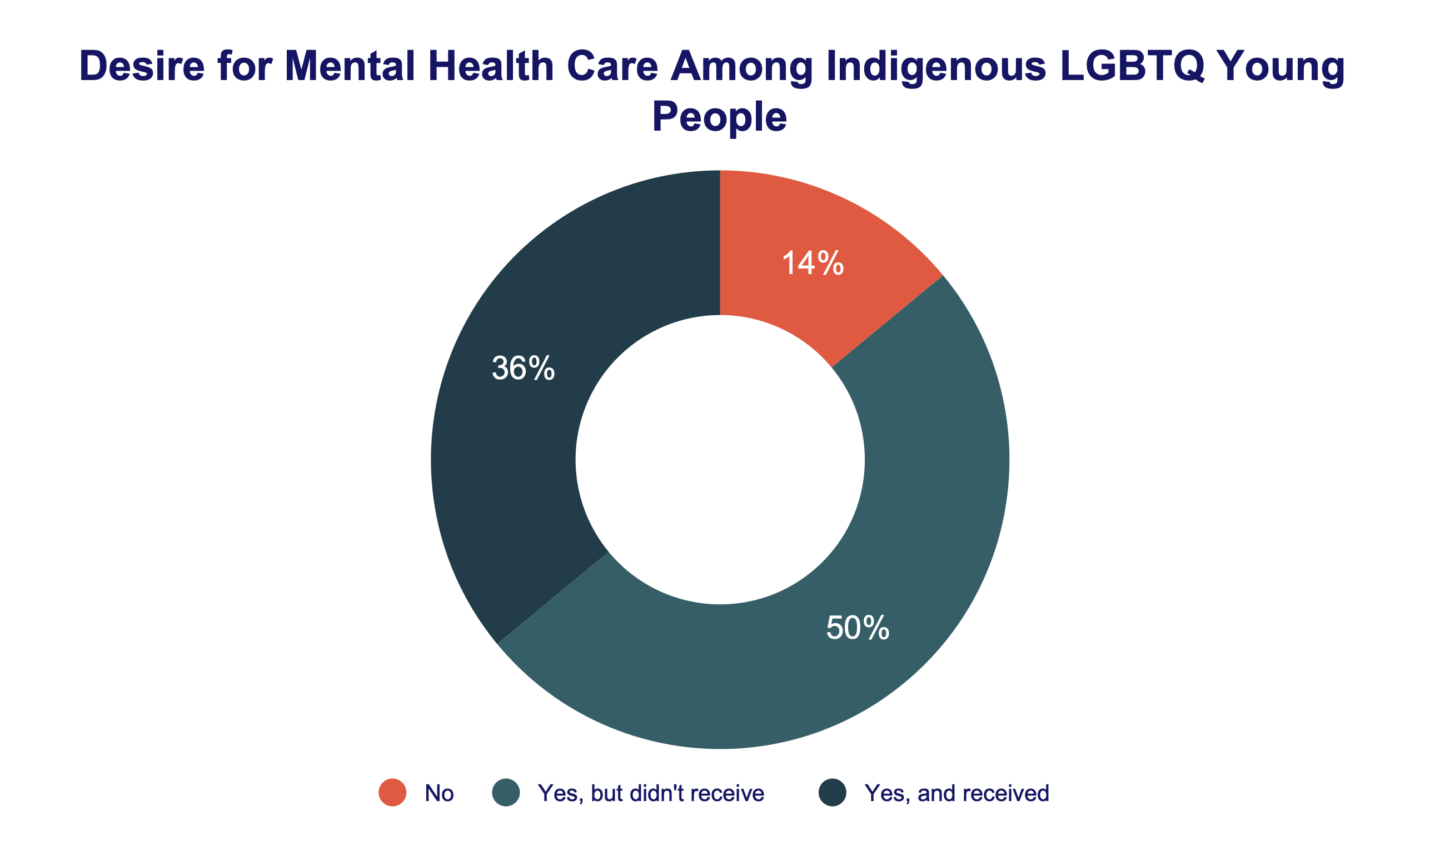 Desire for Mental Health Care Among Indigenous LGBTQ Young People